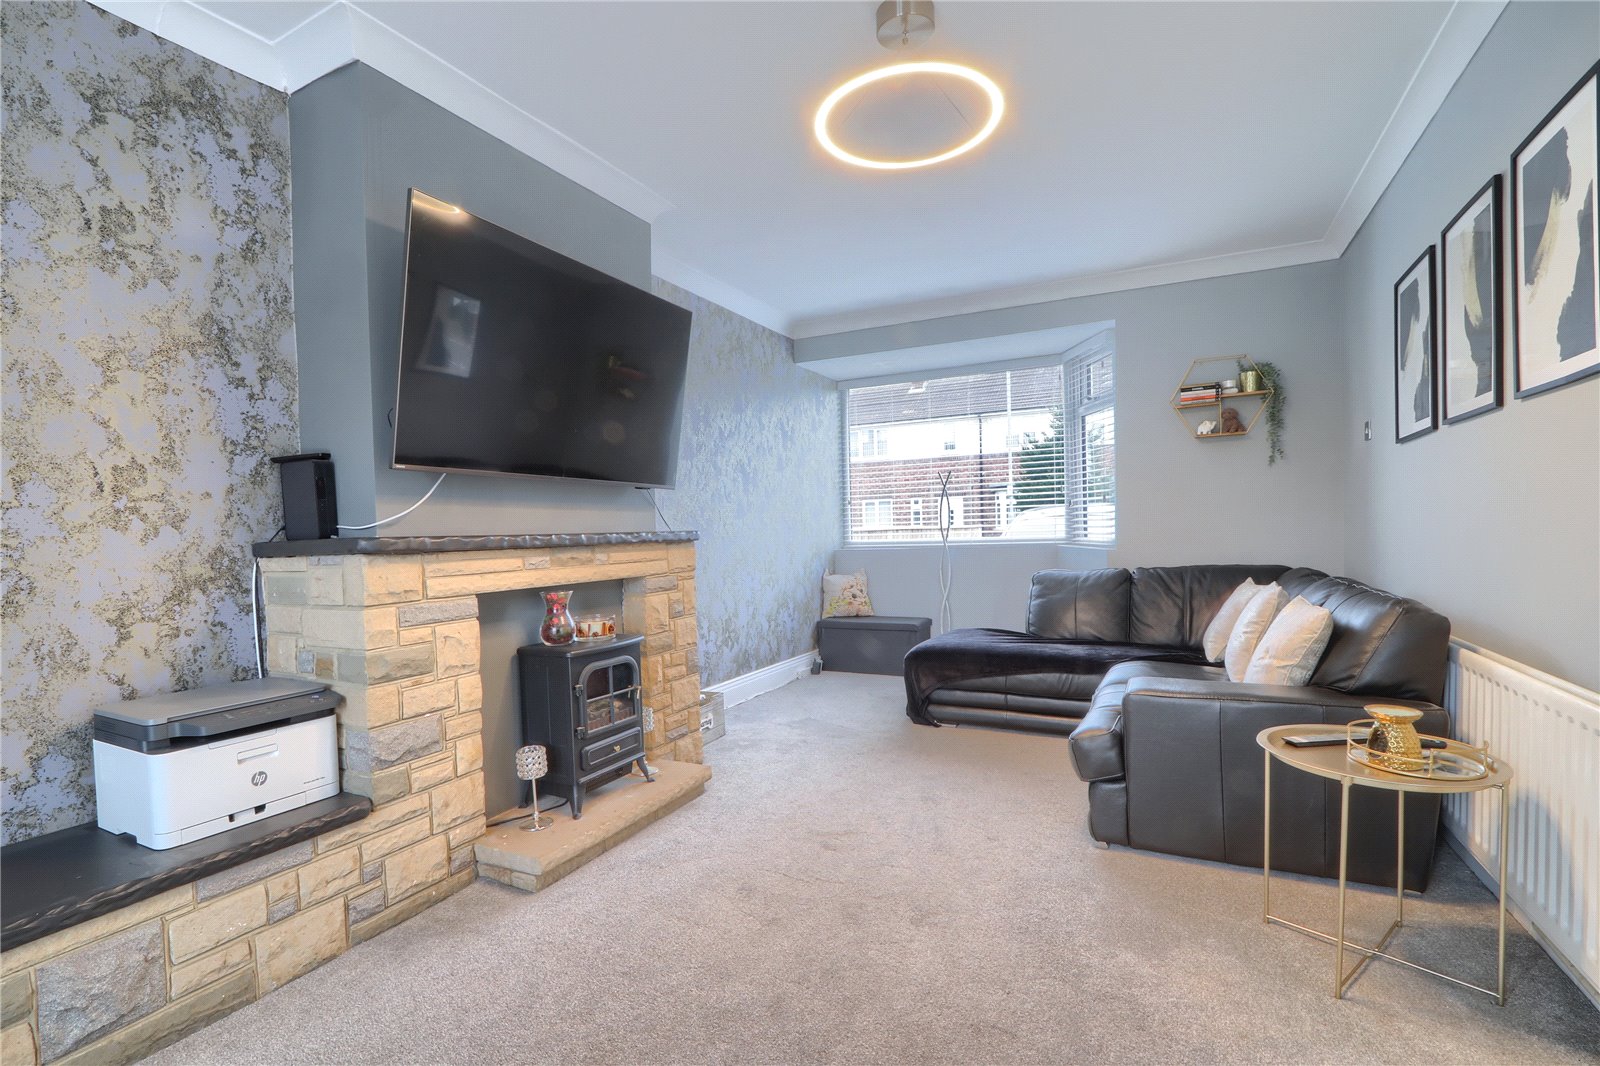 3 bed house for sale in Lingdale Close, Stockton-on-Tees  - Property Image 6